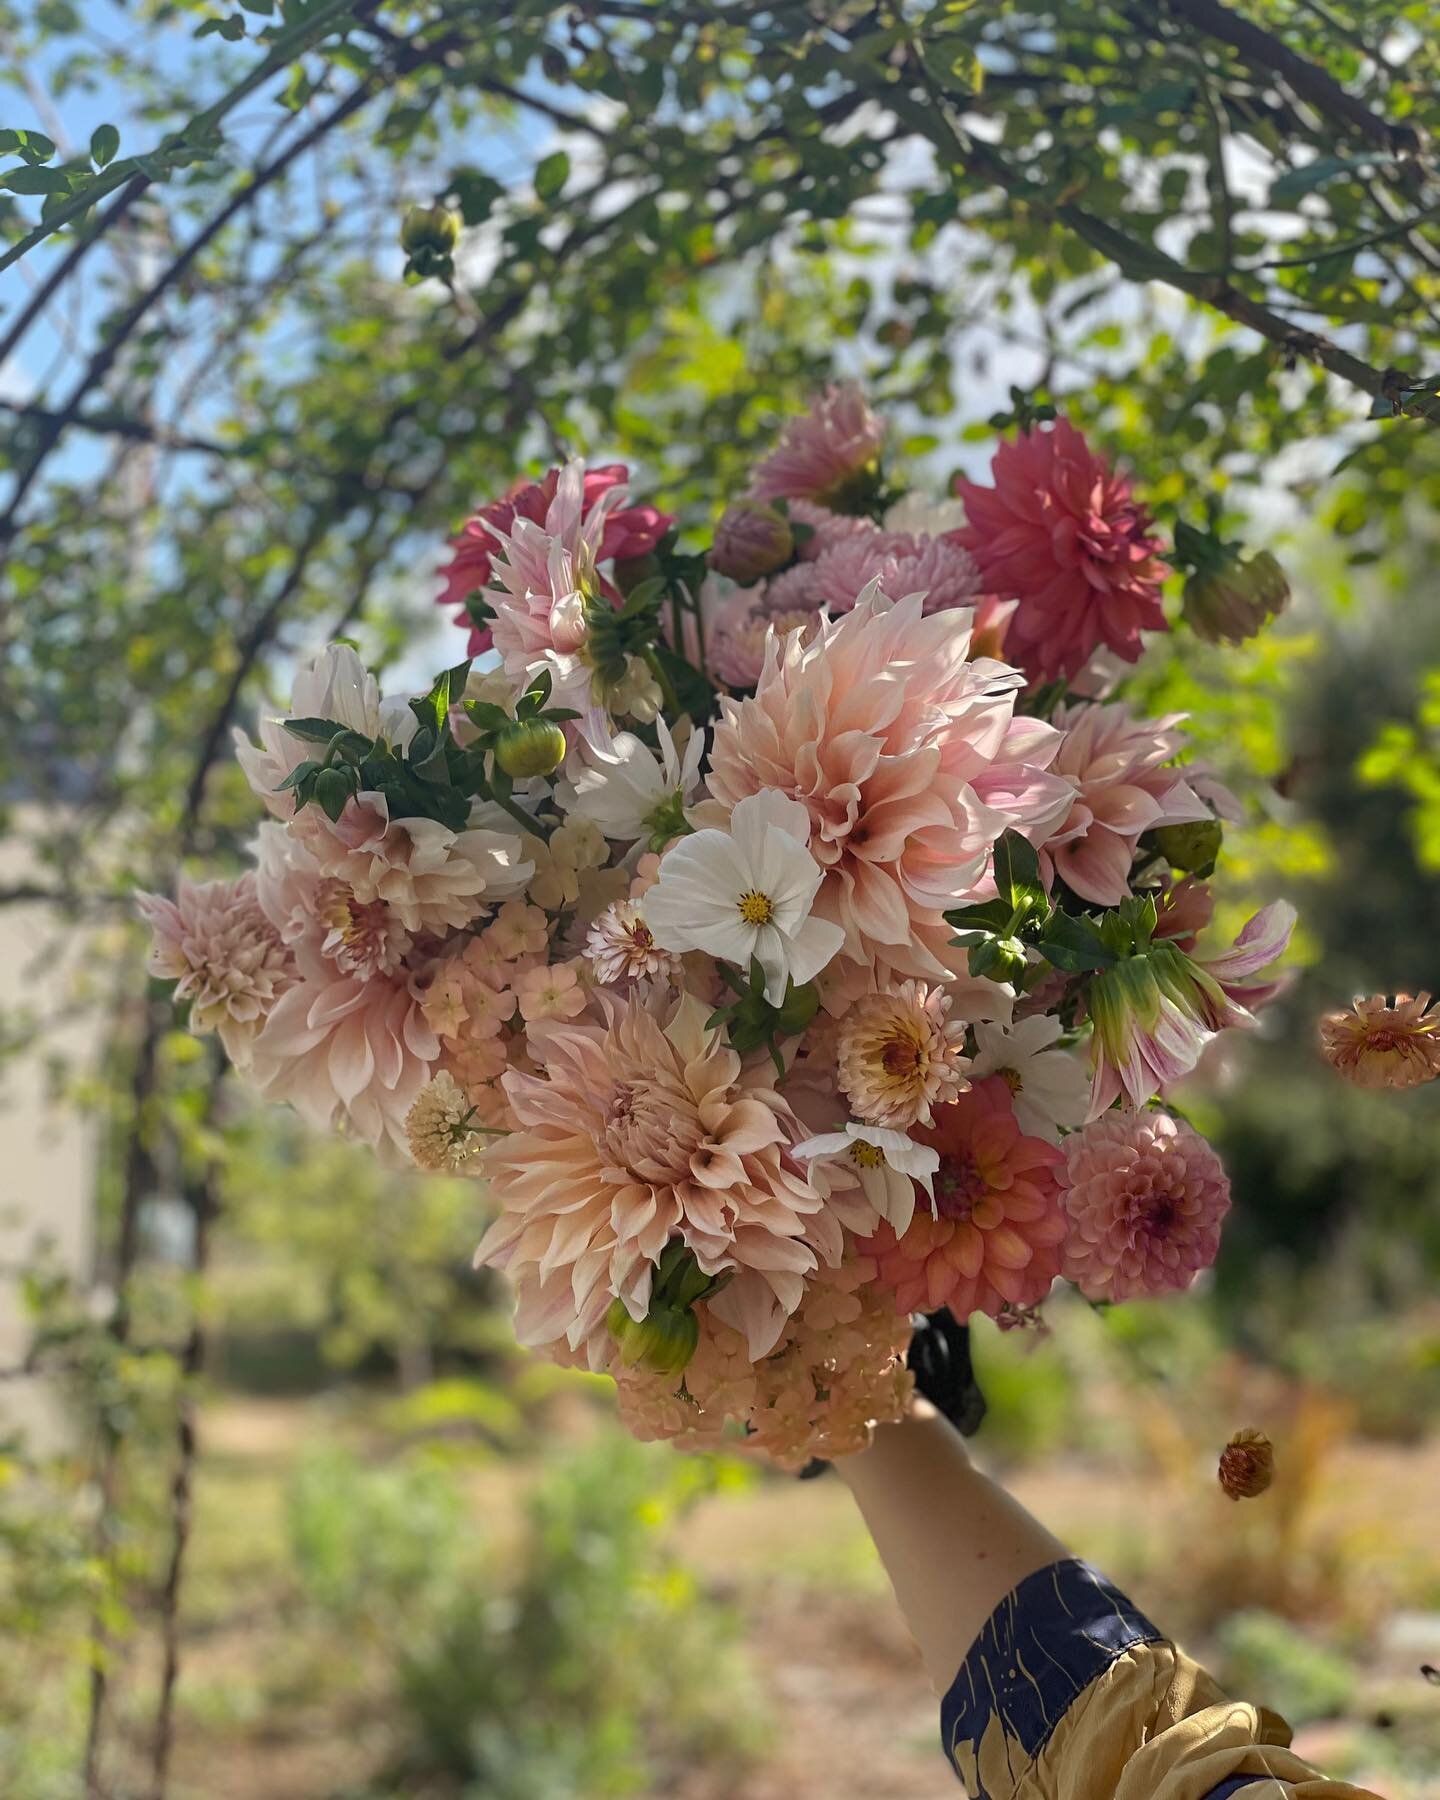 Beautiful bunch of pillowy soft dahlias, China asters, phlox, pincushion scabiousa, cosmos and calendula for a first birthday yesterday 🌸🎀🎈

Dm to order dahlia bunches to Bath this Thursday 🌞
⠀⠀⠀⠀⠀⠀⠀⠀⠀
#somersetflowers #flowersfeomthefarm #grownn